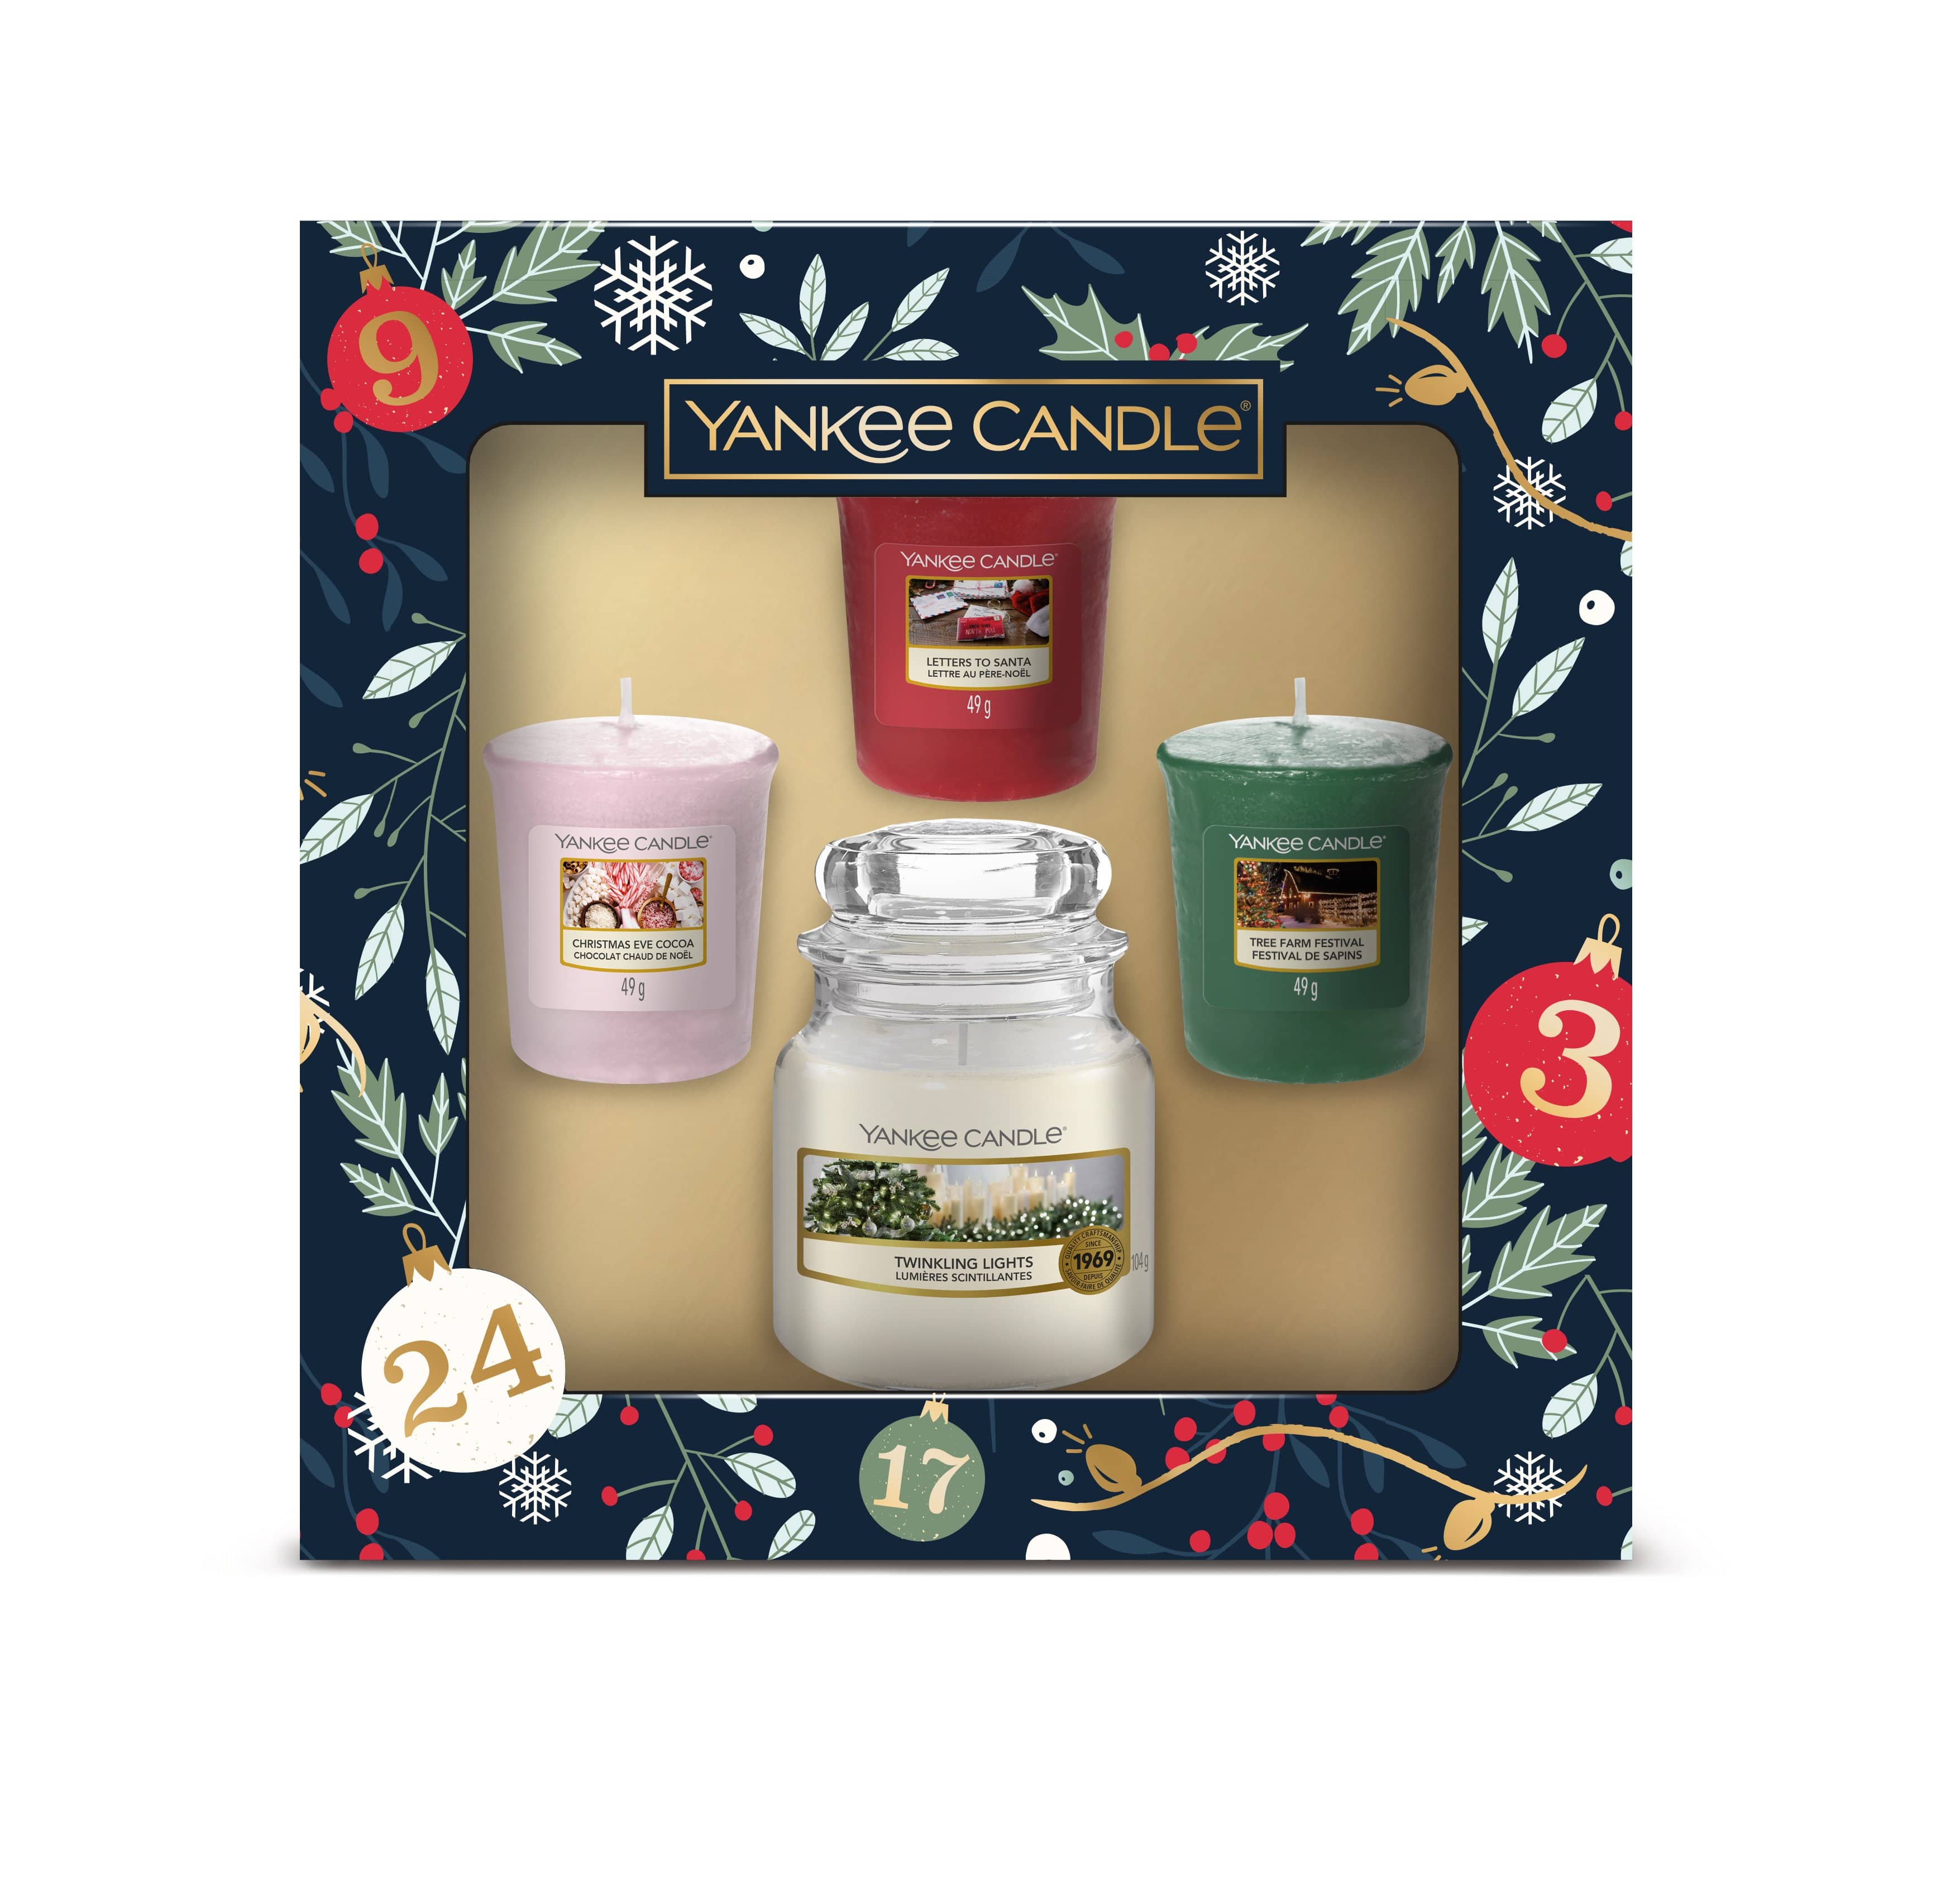 Yankee Candle Gift Set Yankee Candle Countdown to Christmas Gift Set - 1 Small Jar & 3 Votives